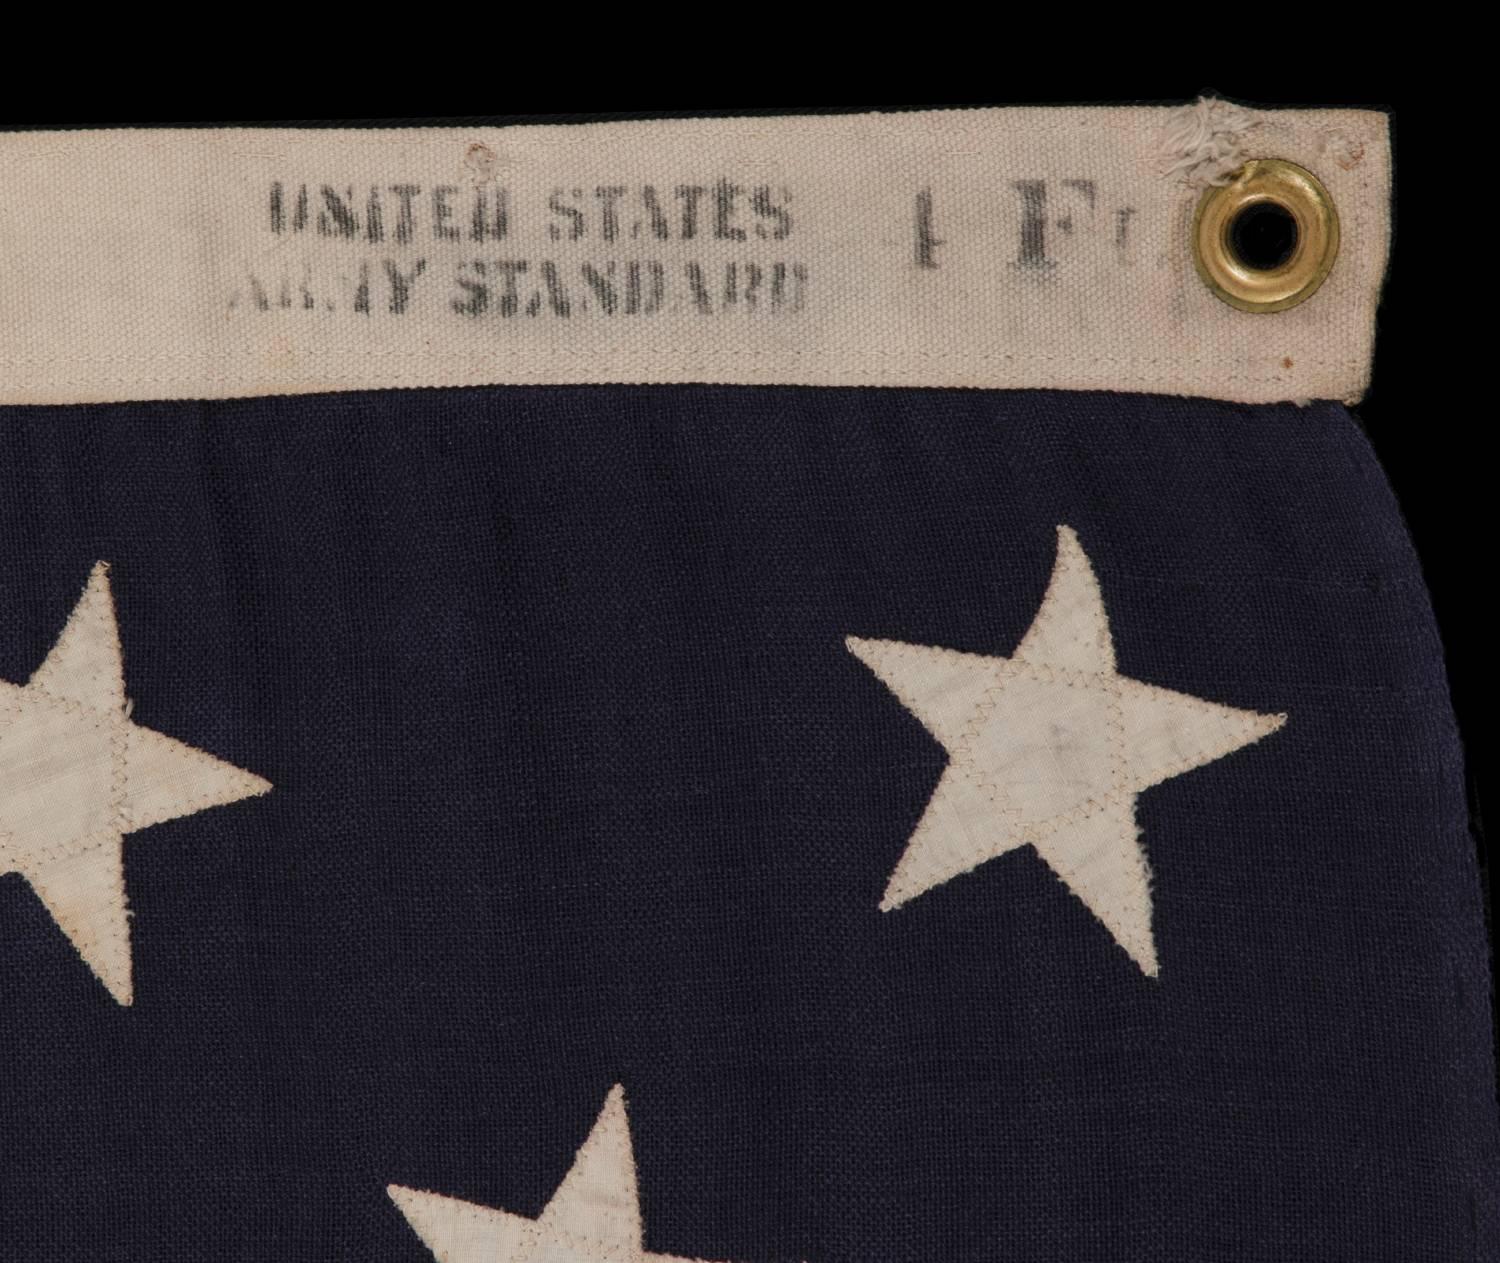 Late 19th Century 13 Stars Arranged in a 3-2-3-2-3 Pattern on a Small-Scale Antique American Flag